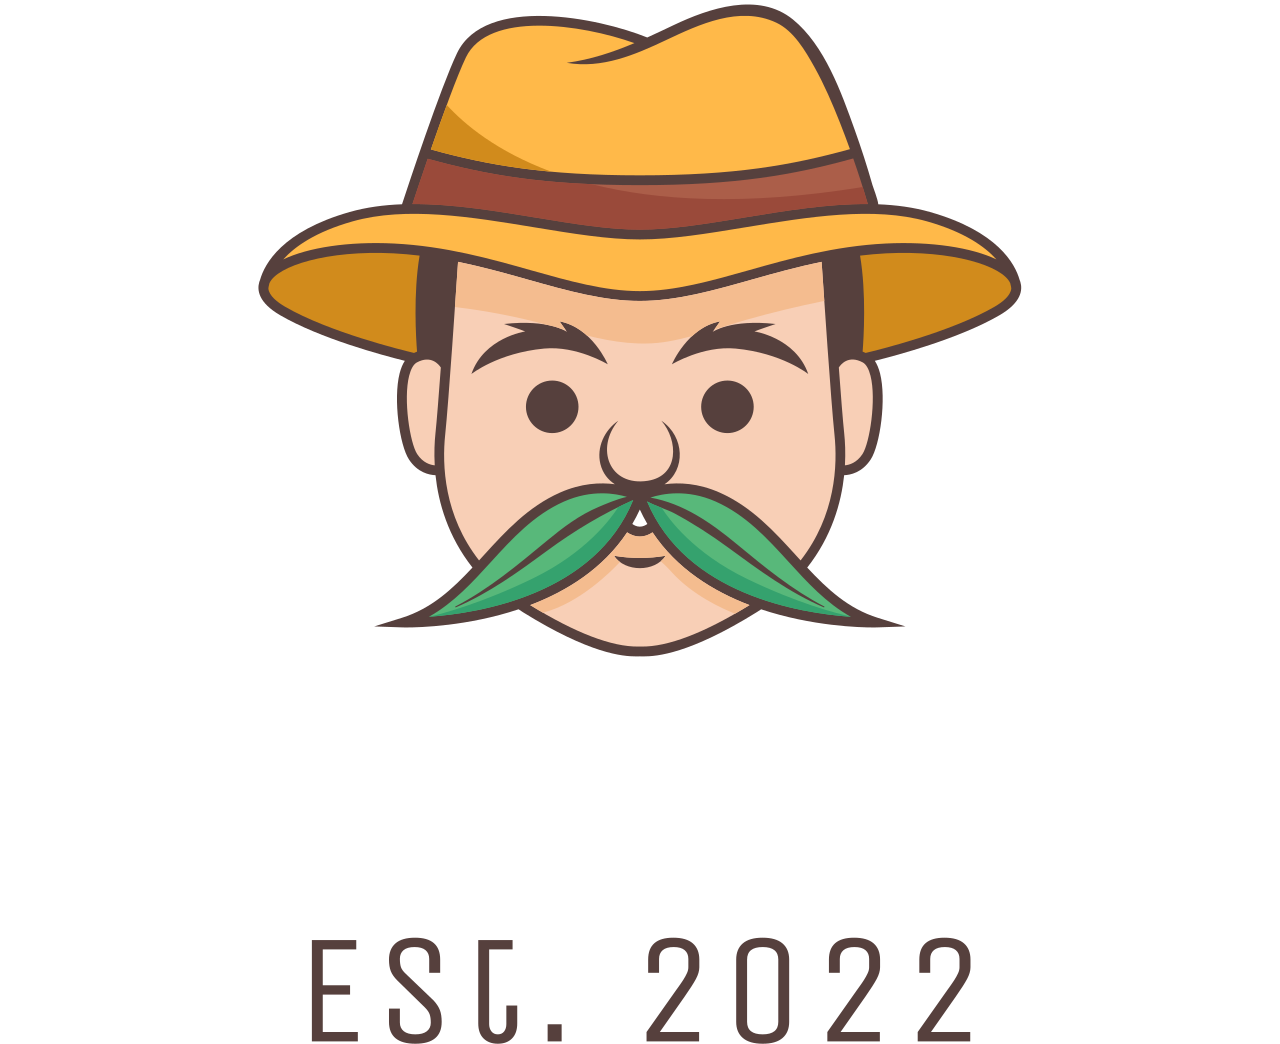 Little Fowler's web page